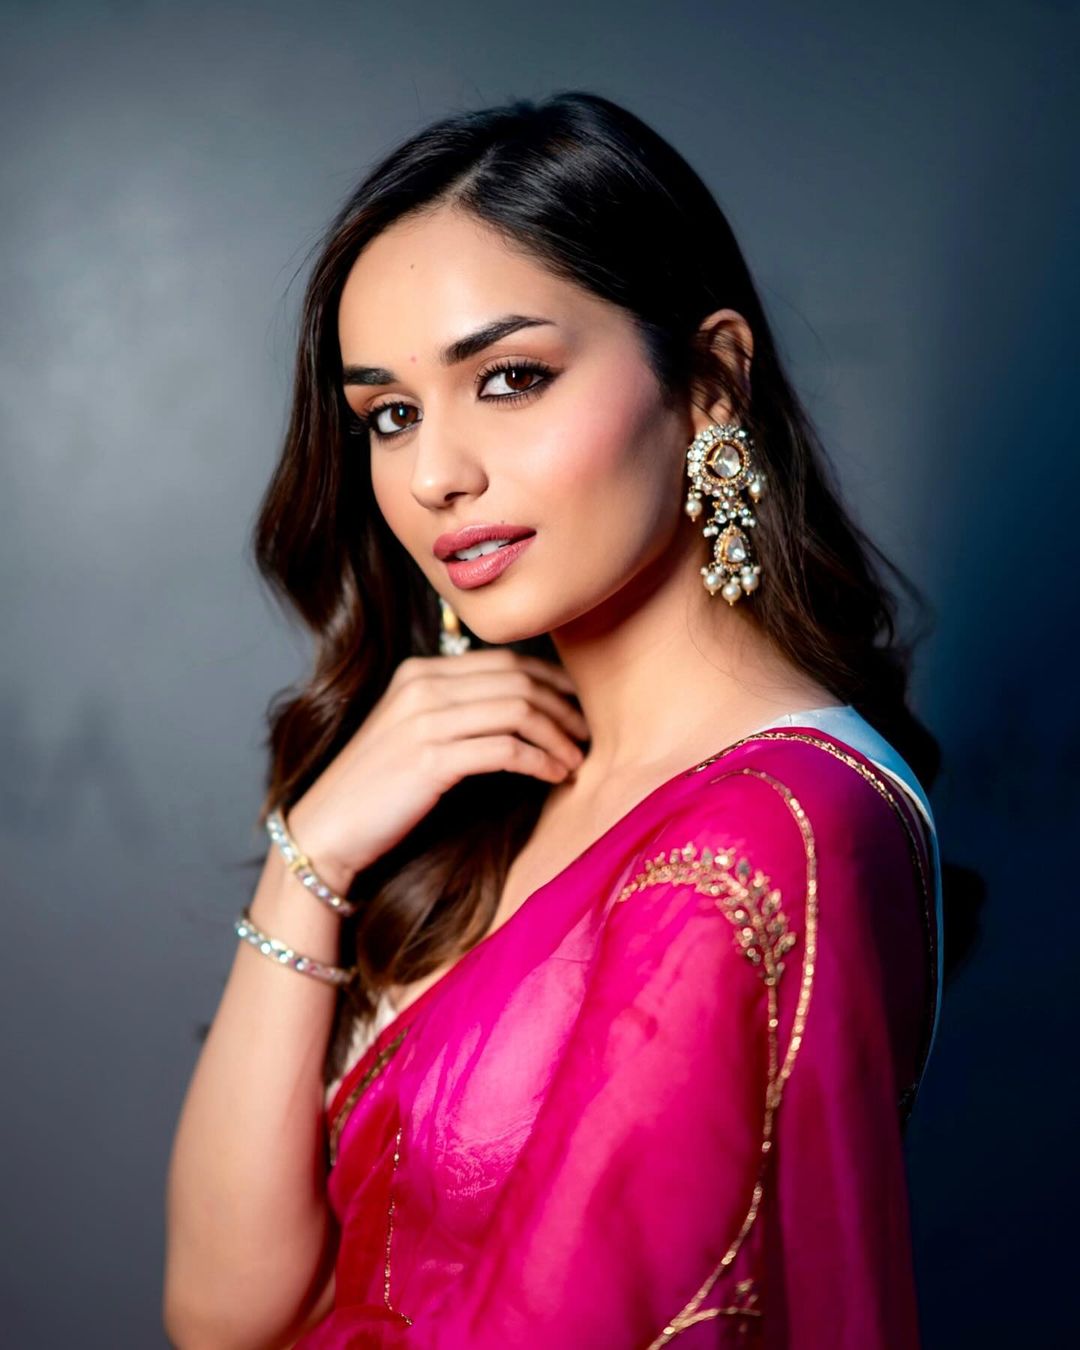 In Pics: Manushi Chhillar Paints the Town Pink in the Jaw-Dropping Saree